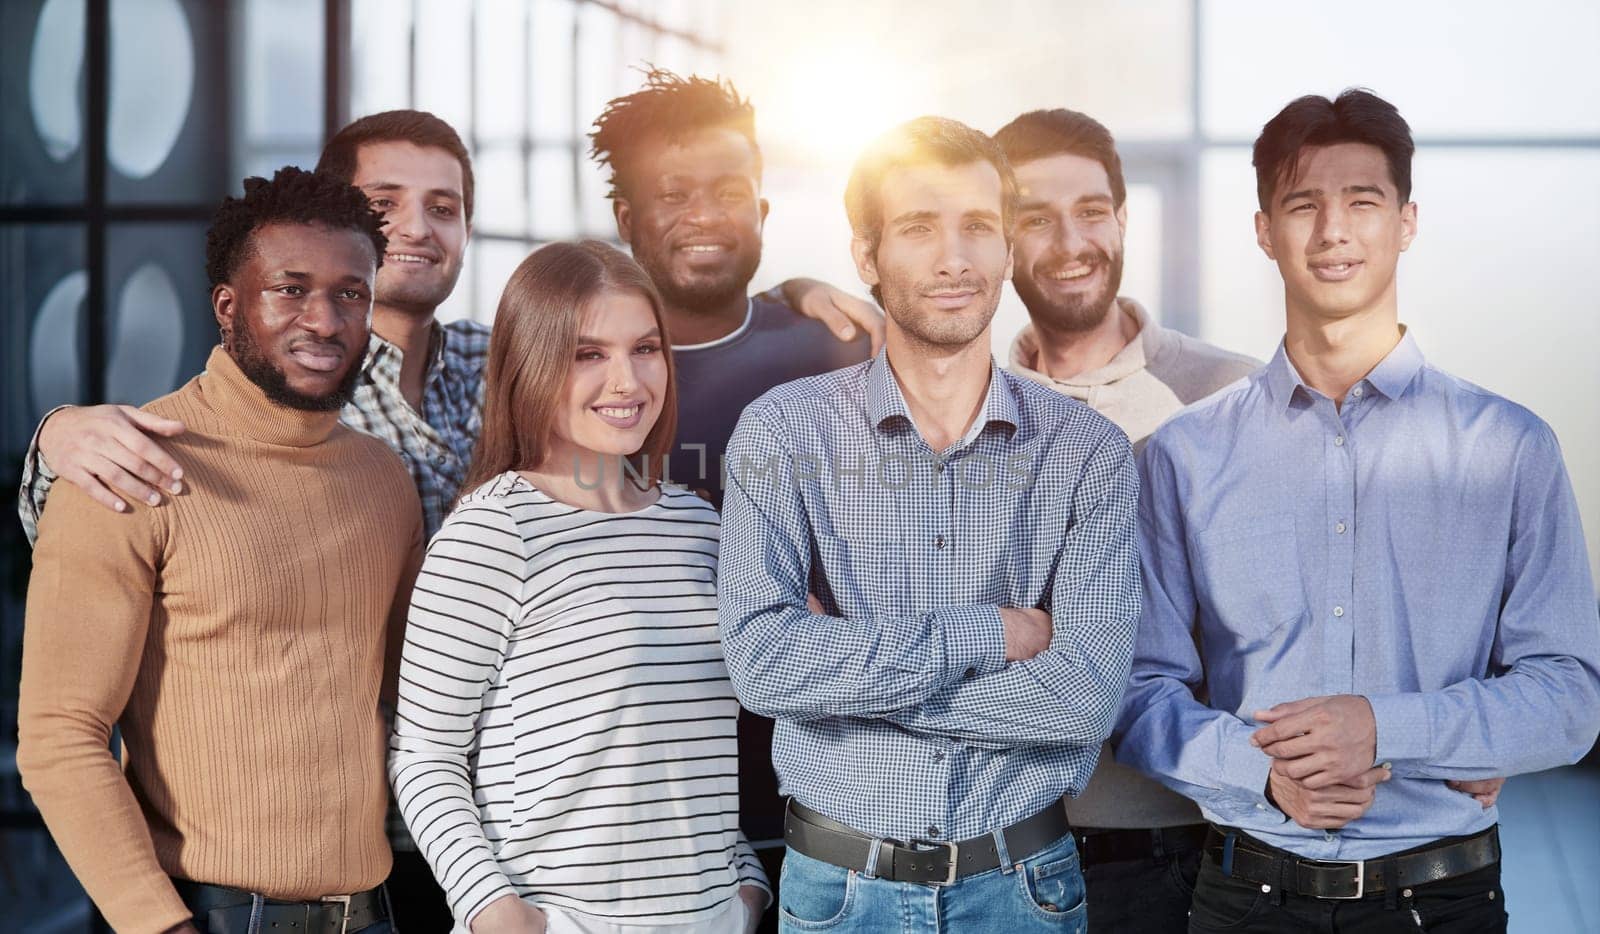 Everybody brings a different skill to the team. Portrait of a diverse group of coworkers standing in an office.